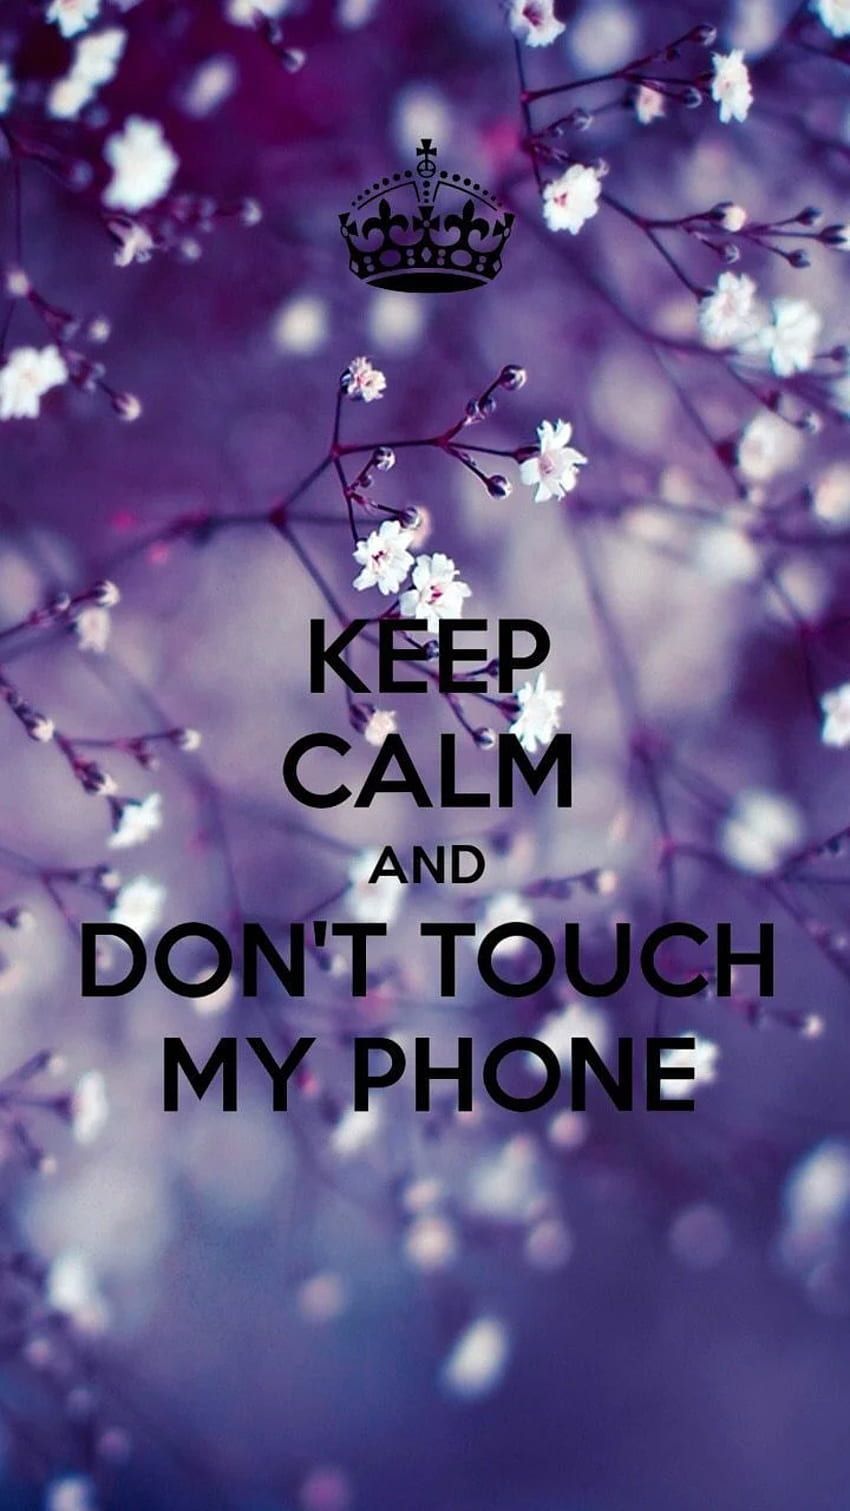 Keep calm and don't touch my phone wallpaper - Don't touch my phone